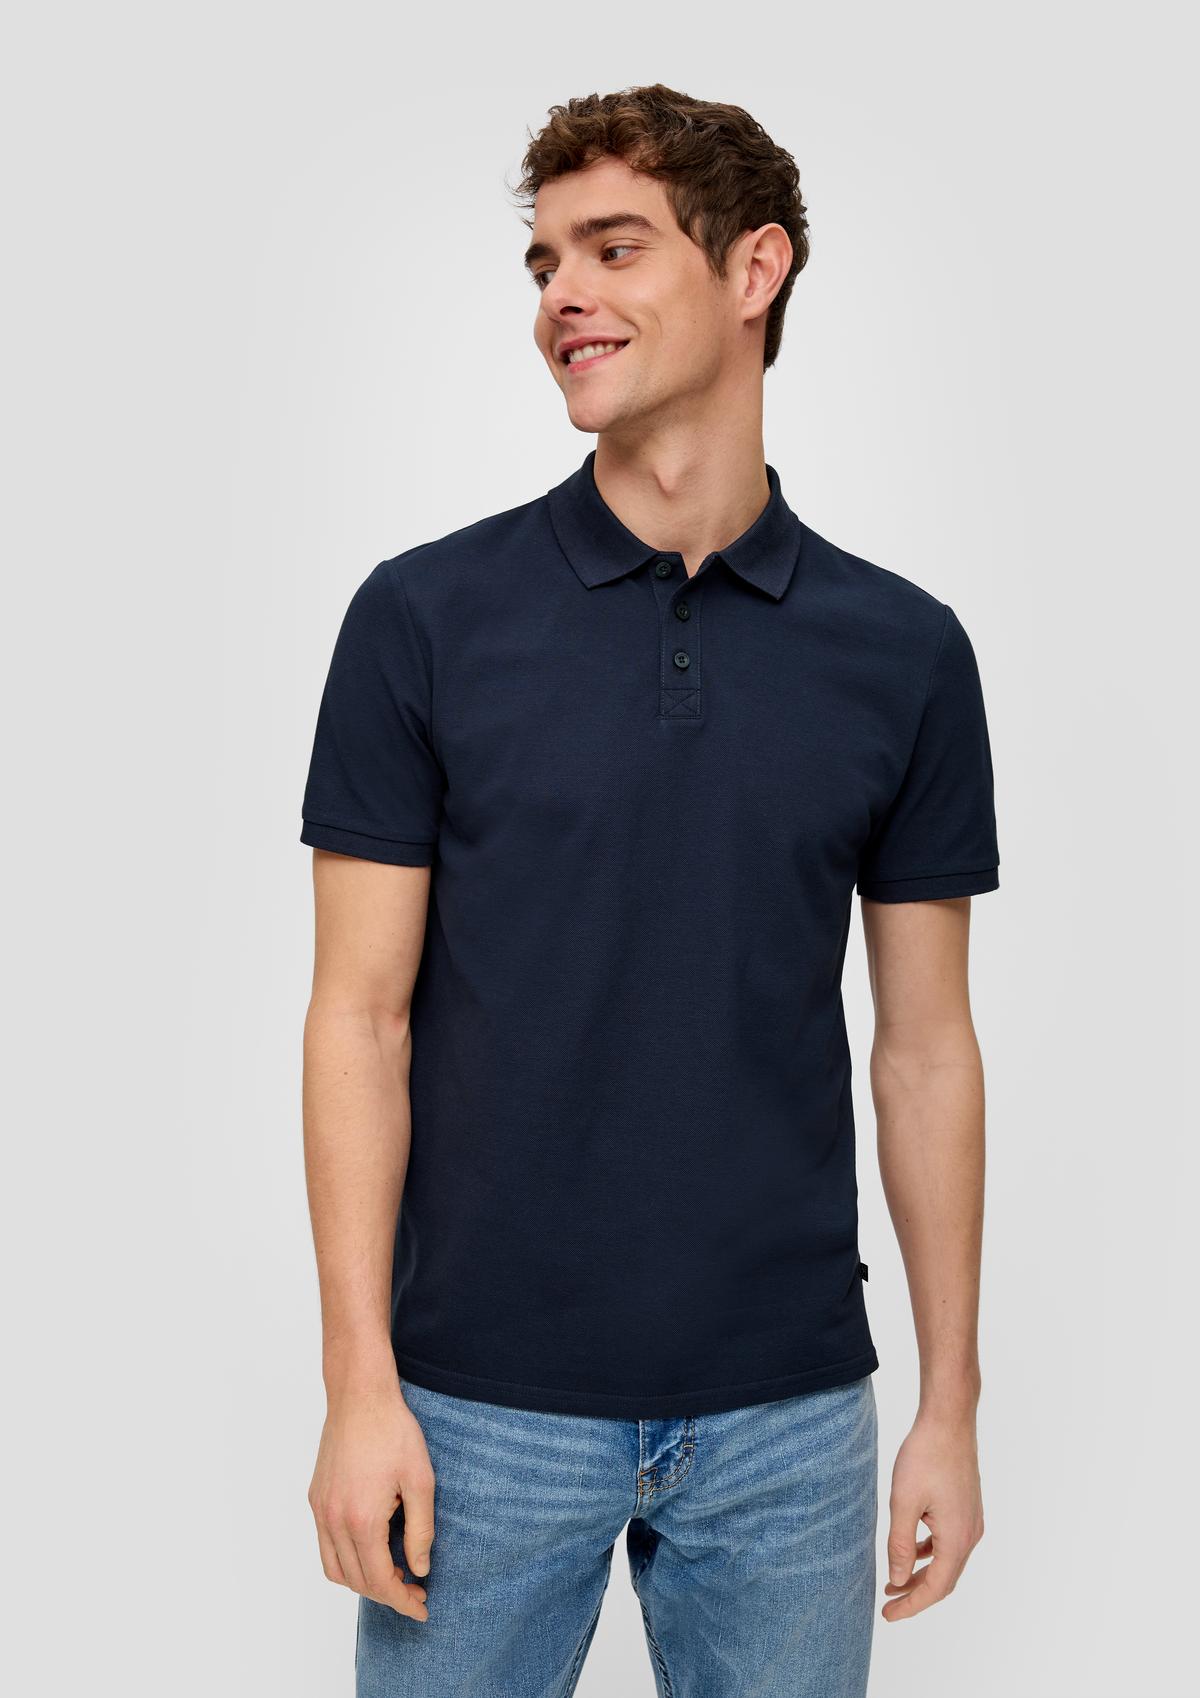 Shirts for Men Polo